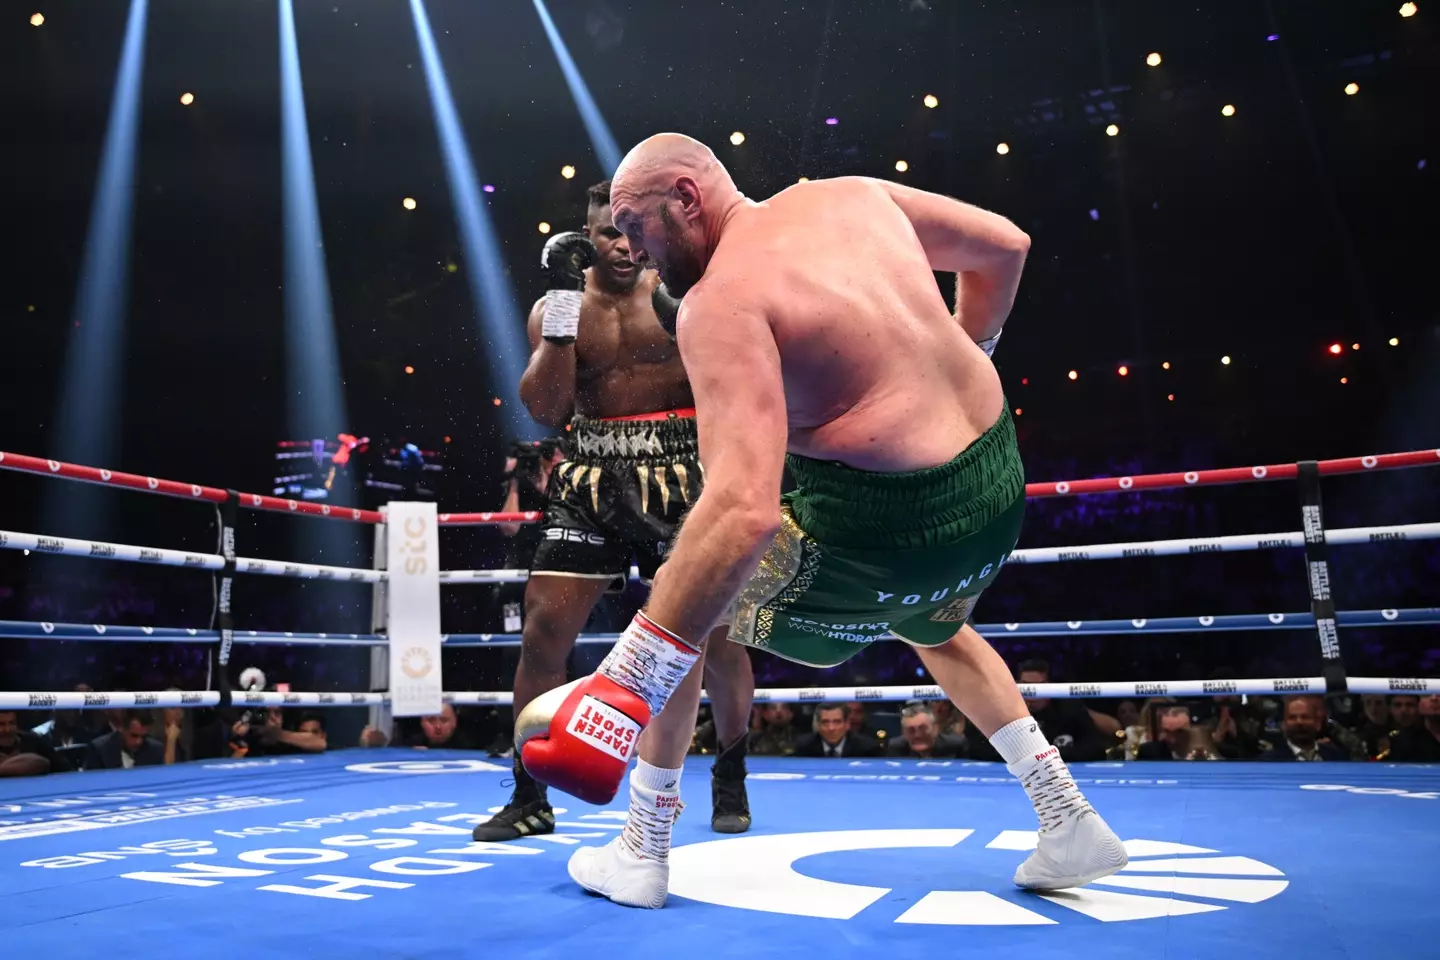 Tyson Fury won on points against Francis Ngannou and remains unbeaten.